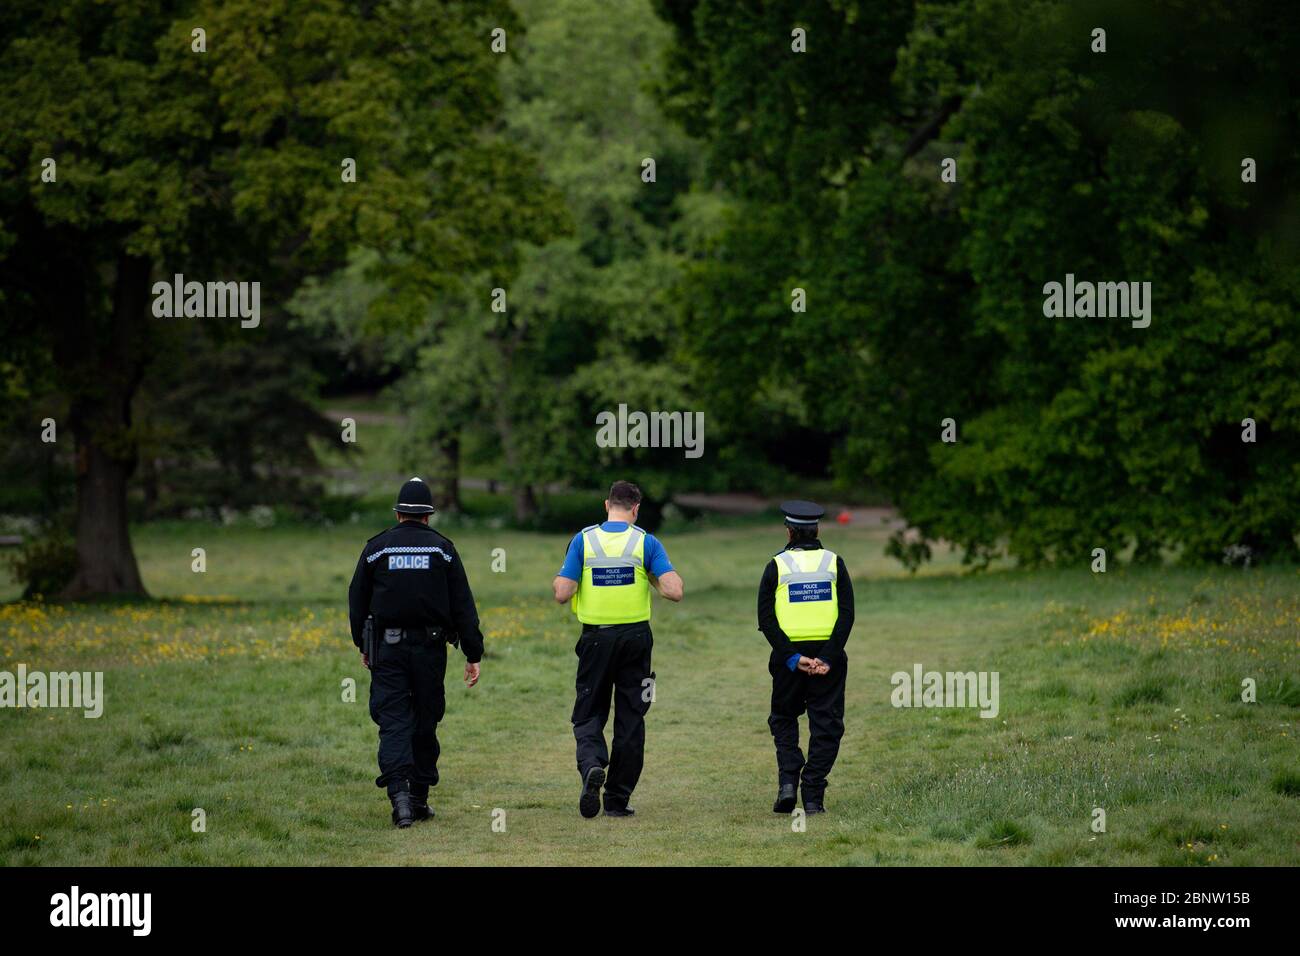 Police officers monitor Highbury Park in Birmingham, after the introduction of measures to bring the country out of lockdown. Stock Photo